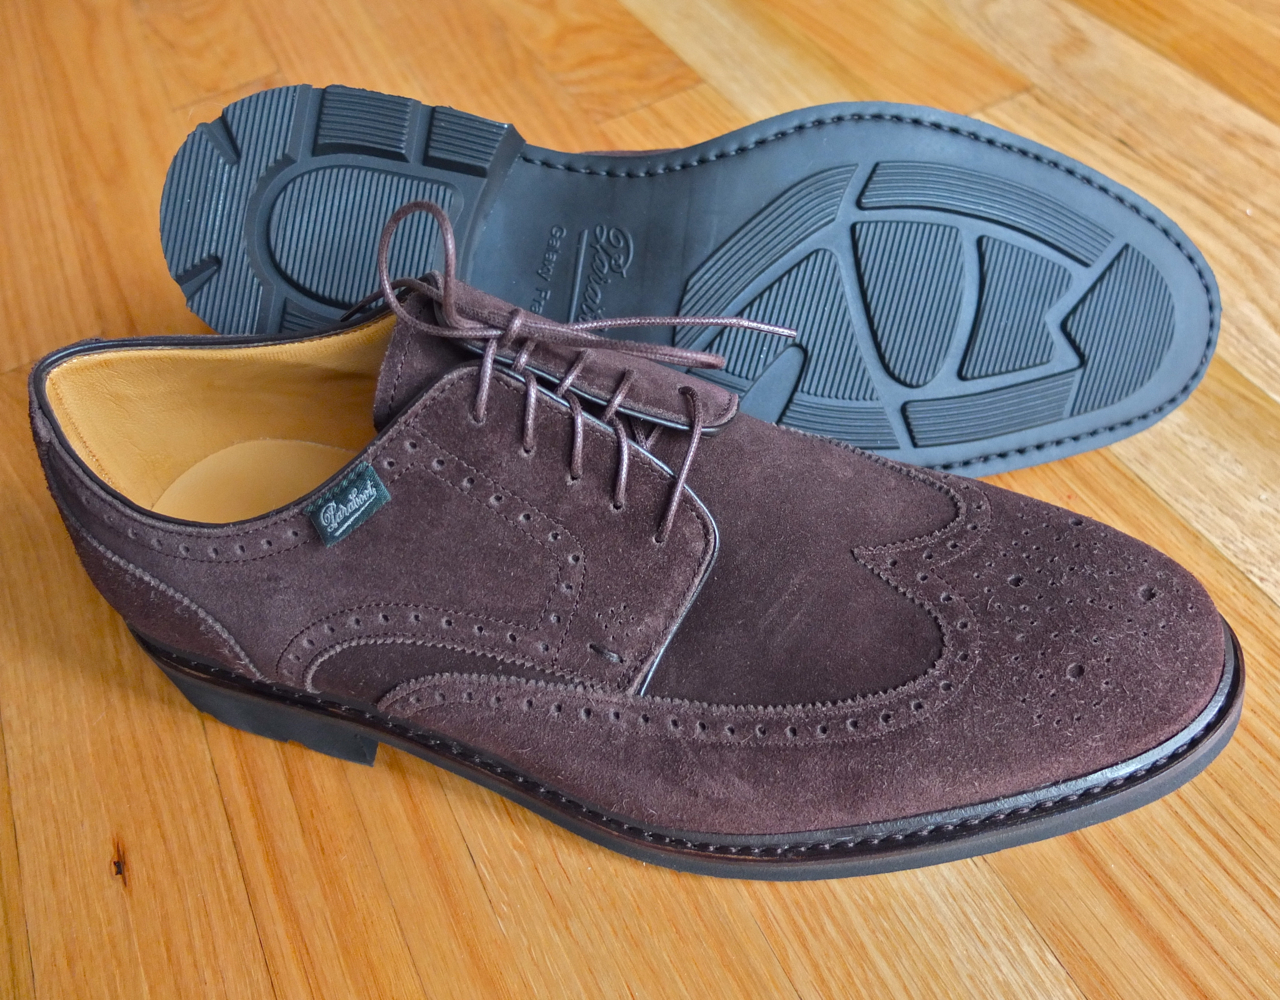 your opinion on paraboot shoes? | Page 2 | Styleforum